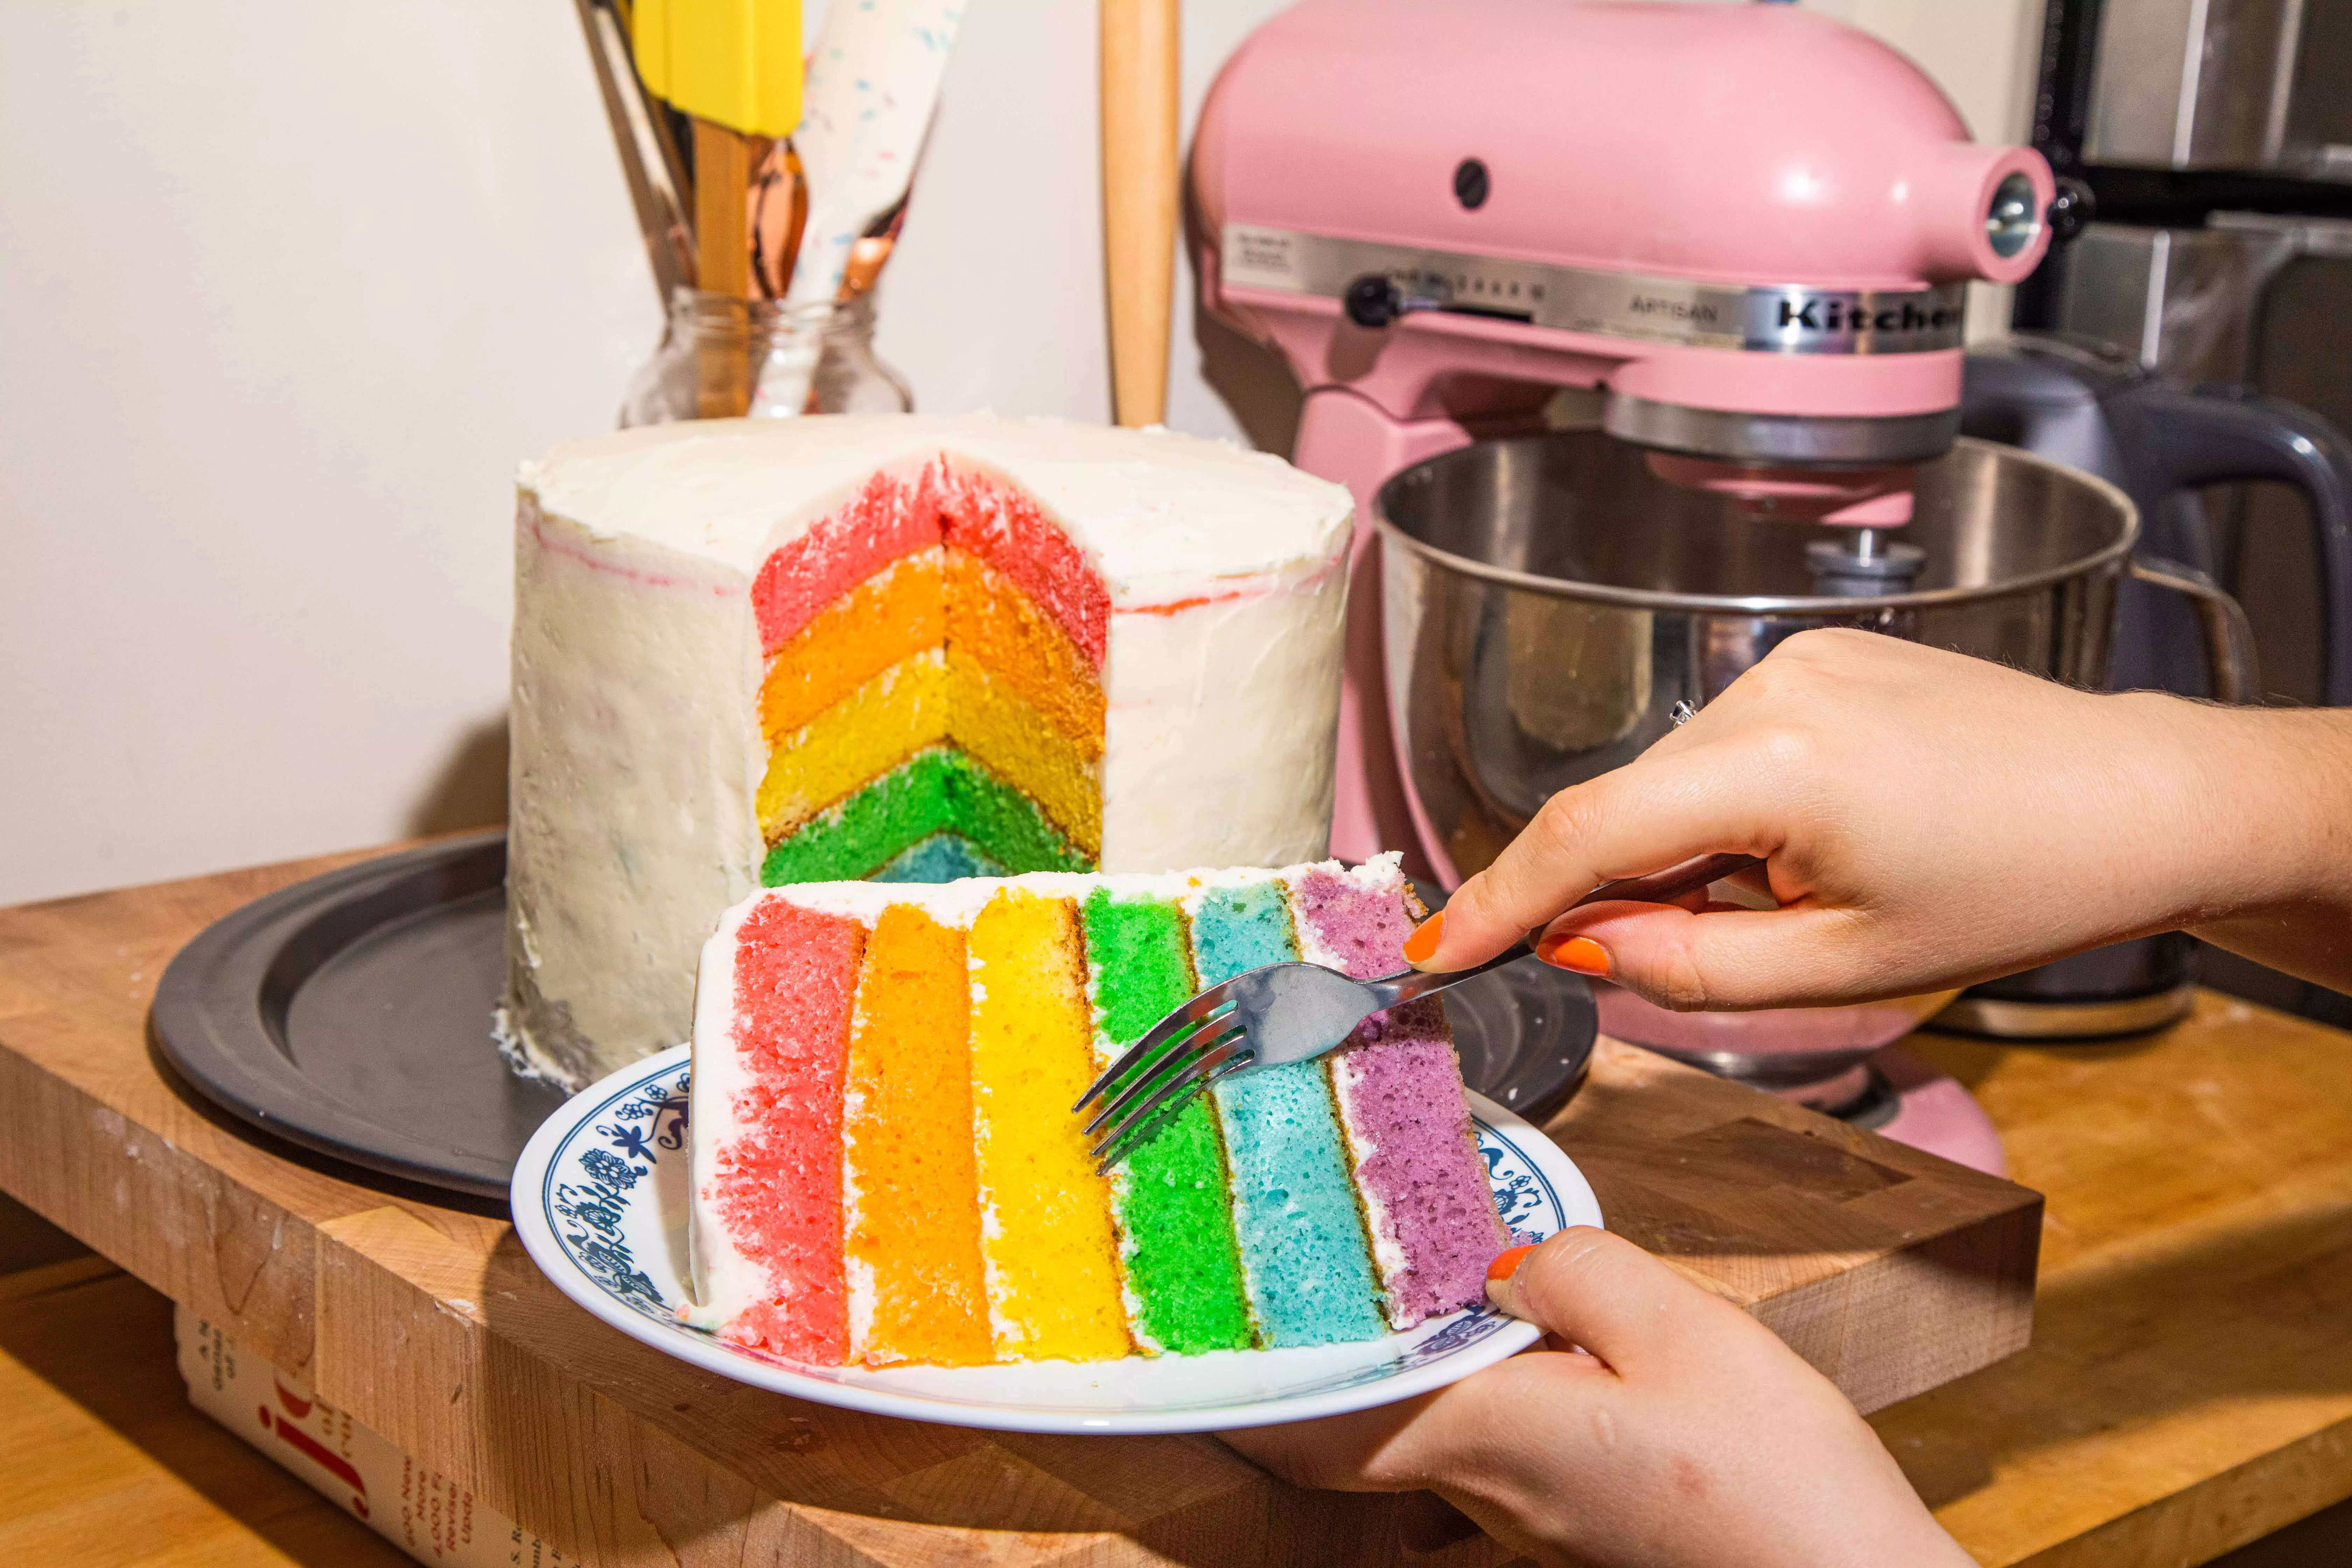 A hand holding a fork cutting into a slice of a layered rainbow cake, with the whole cake in the background